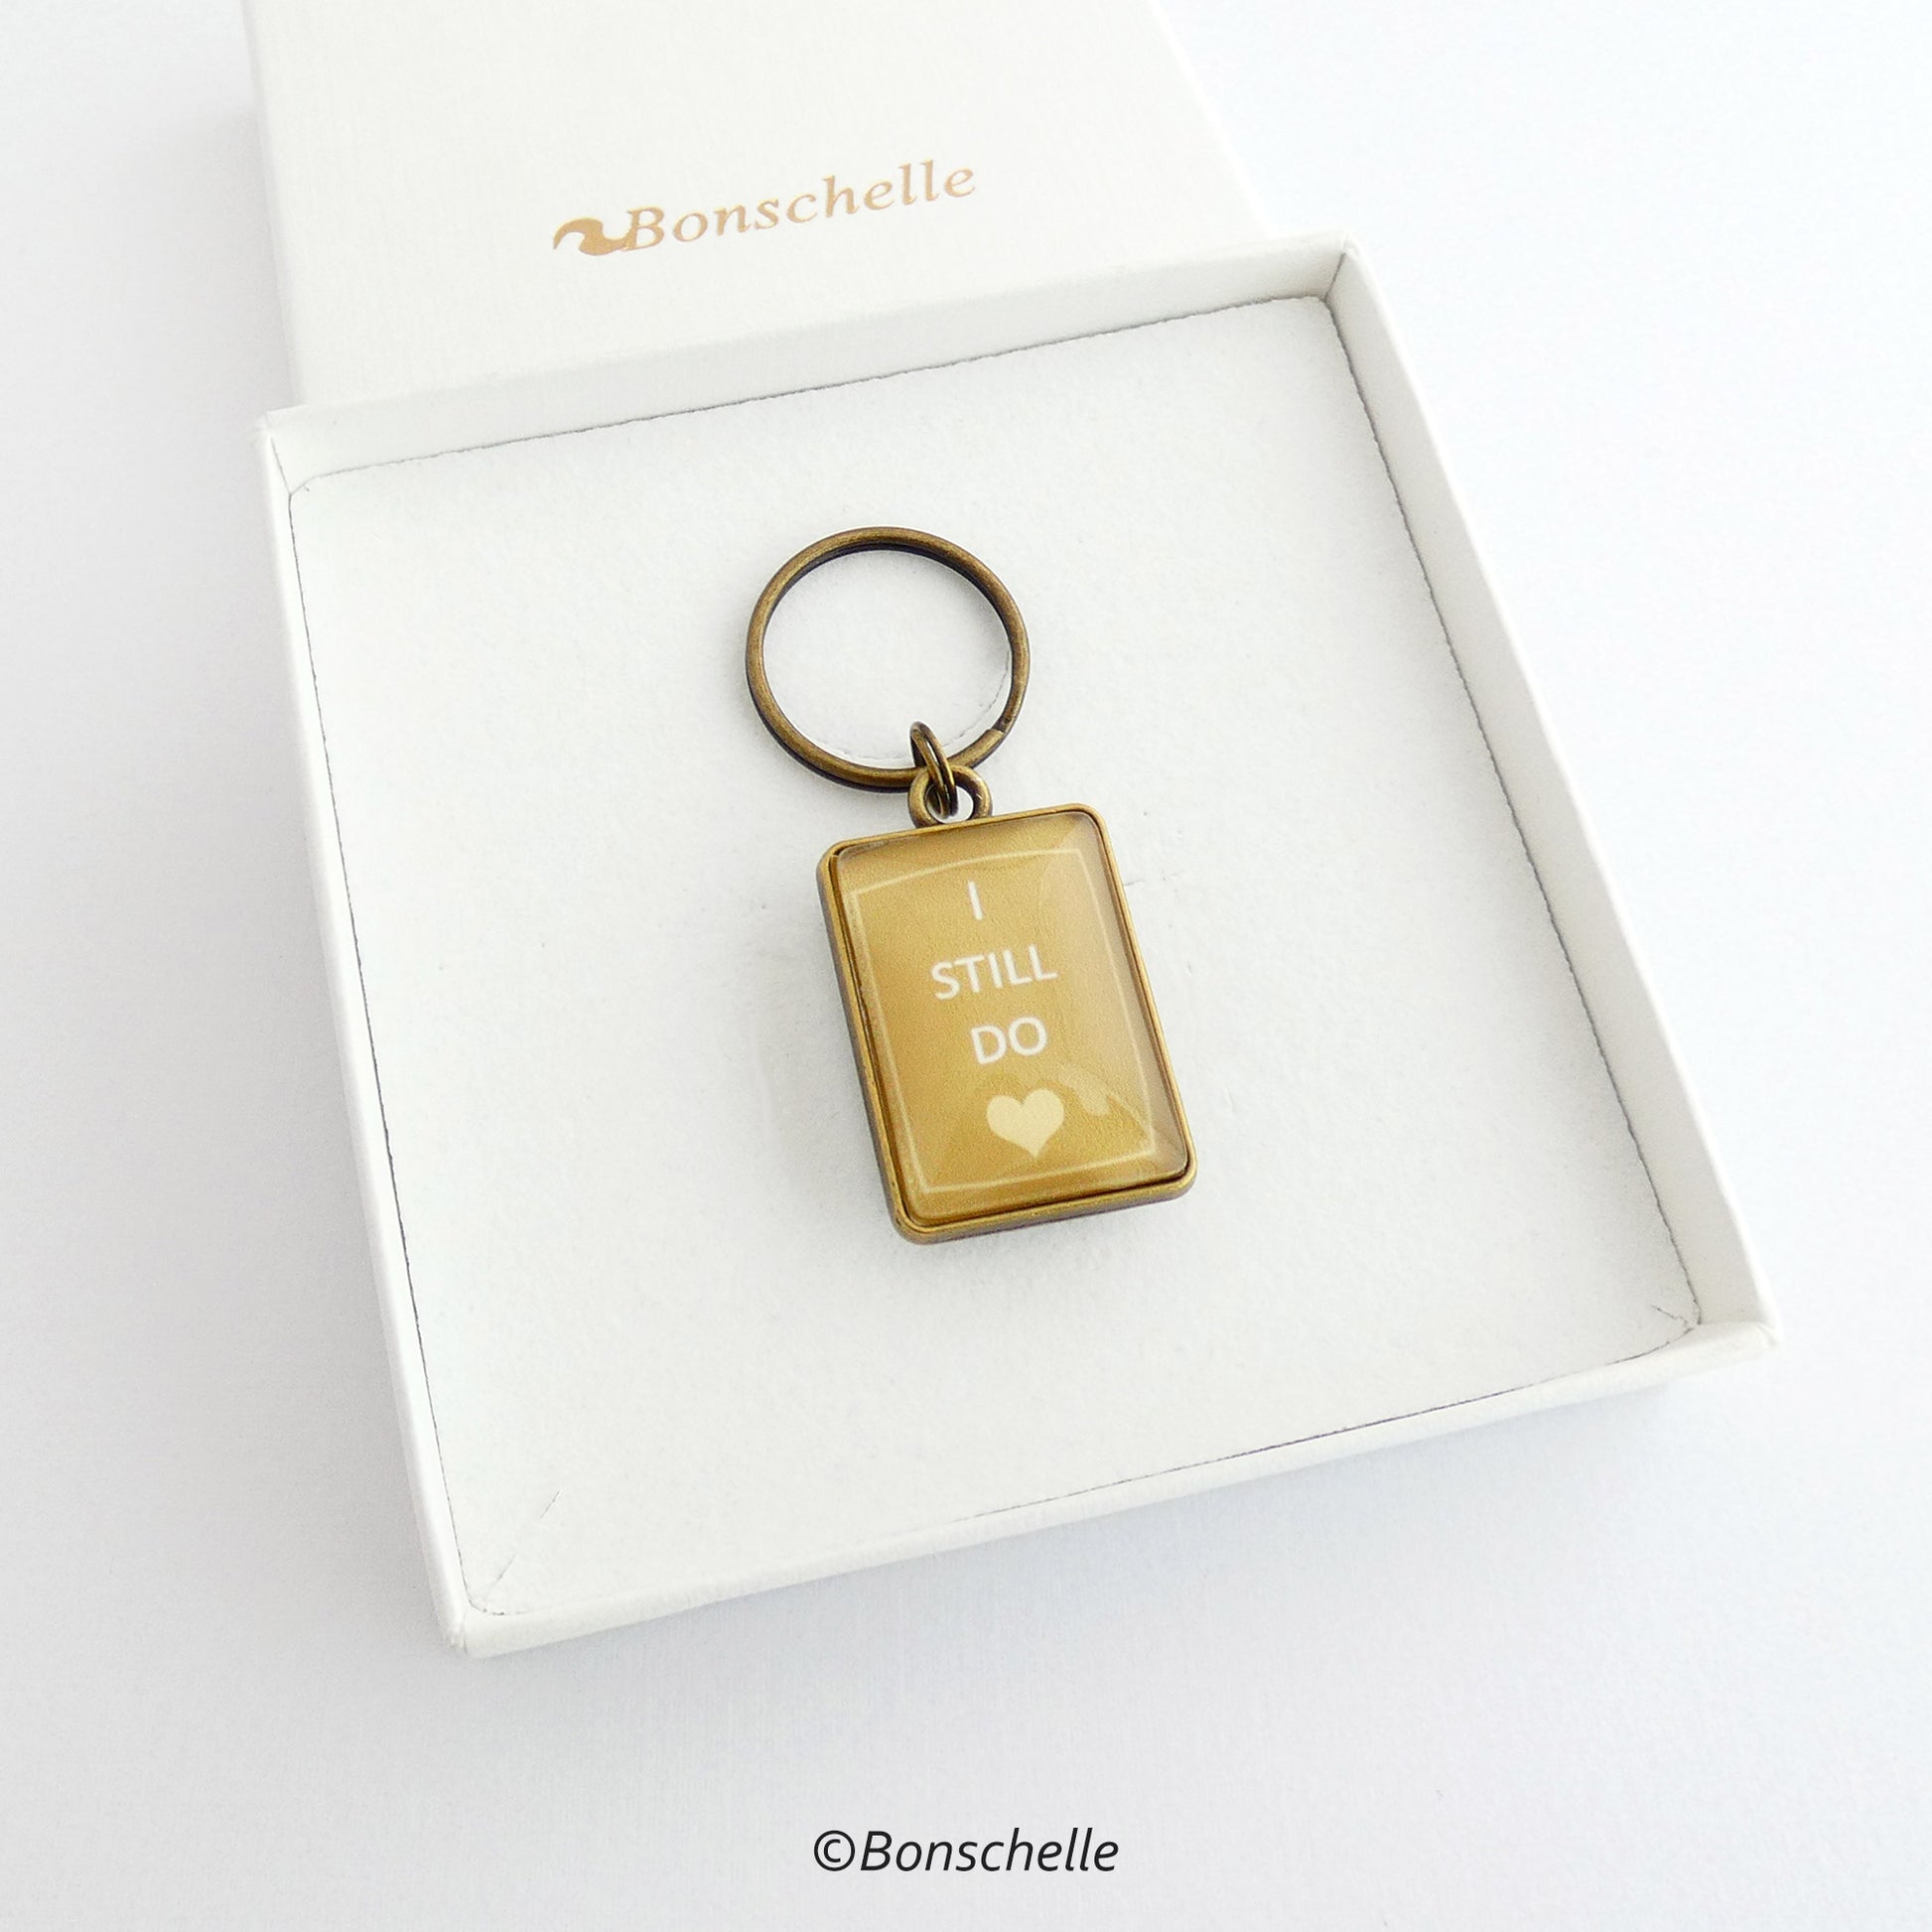 gift box view of the bronze toned metal and glass cabochon rectangle shape keyring for bronze anniversary with personalised date and the worlds I still do